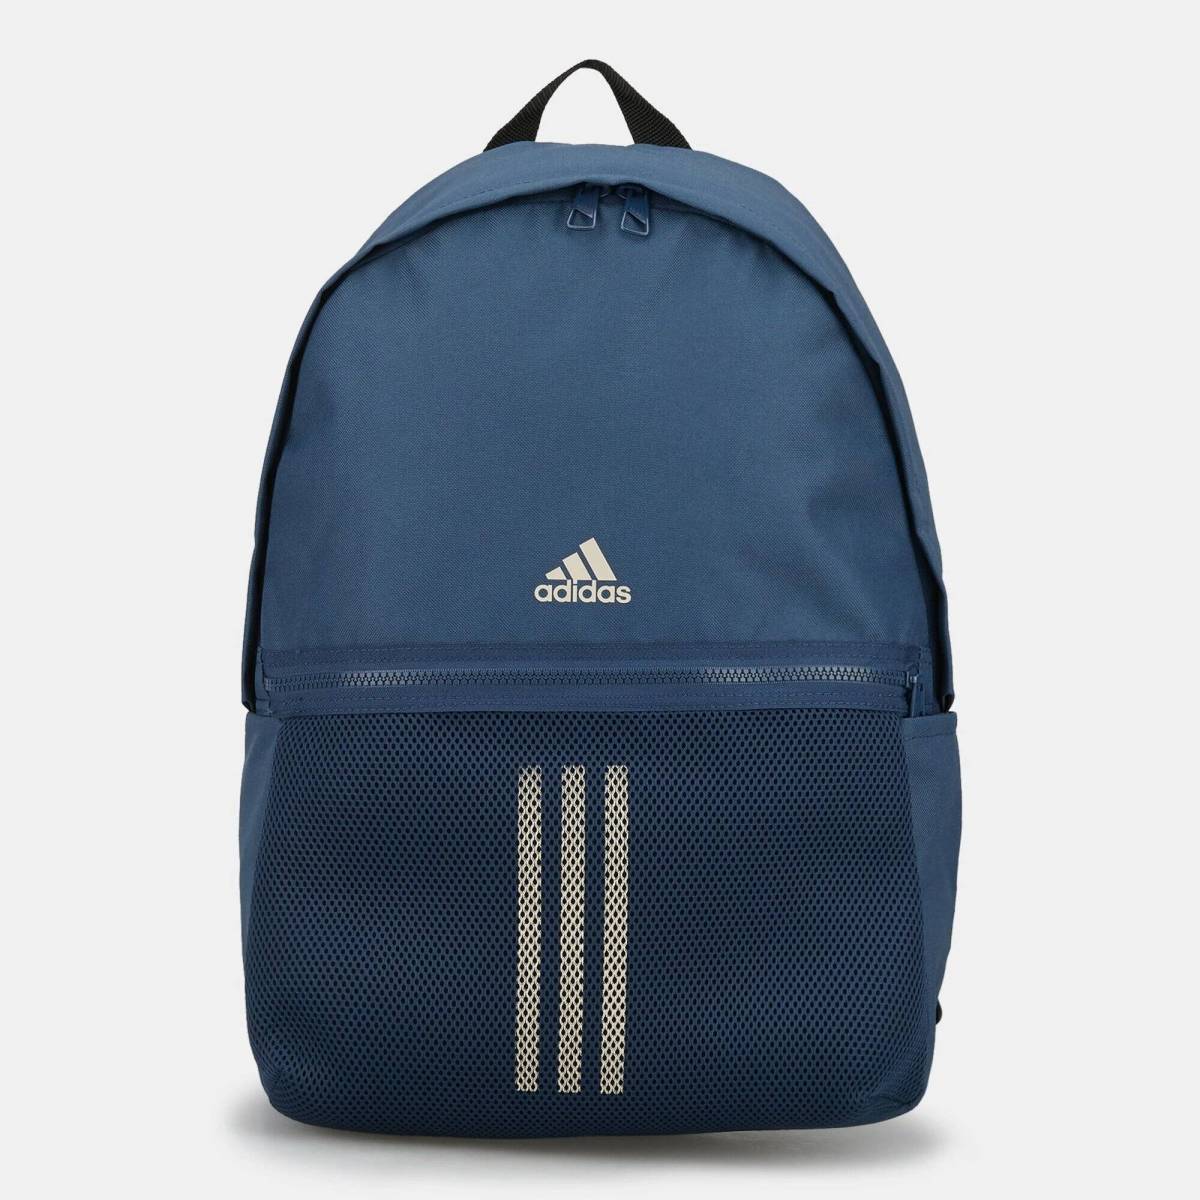 Classic Adidas Backpack Navy Blue 45 cm